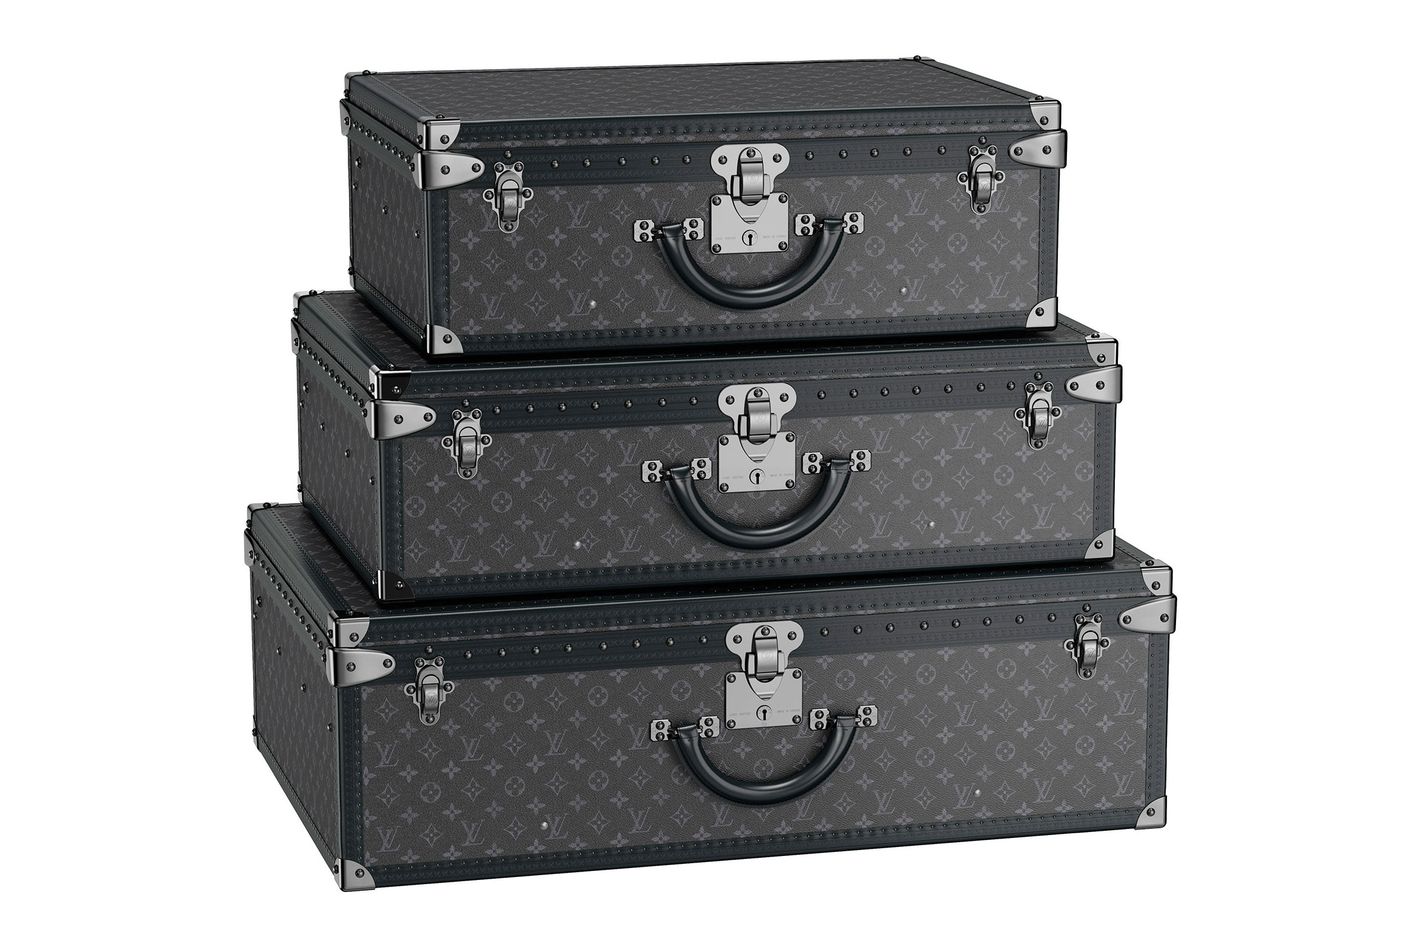 The wealthy's obsession with Louis Vuitton trunks: How they